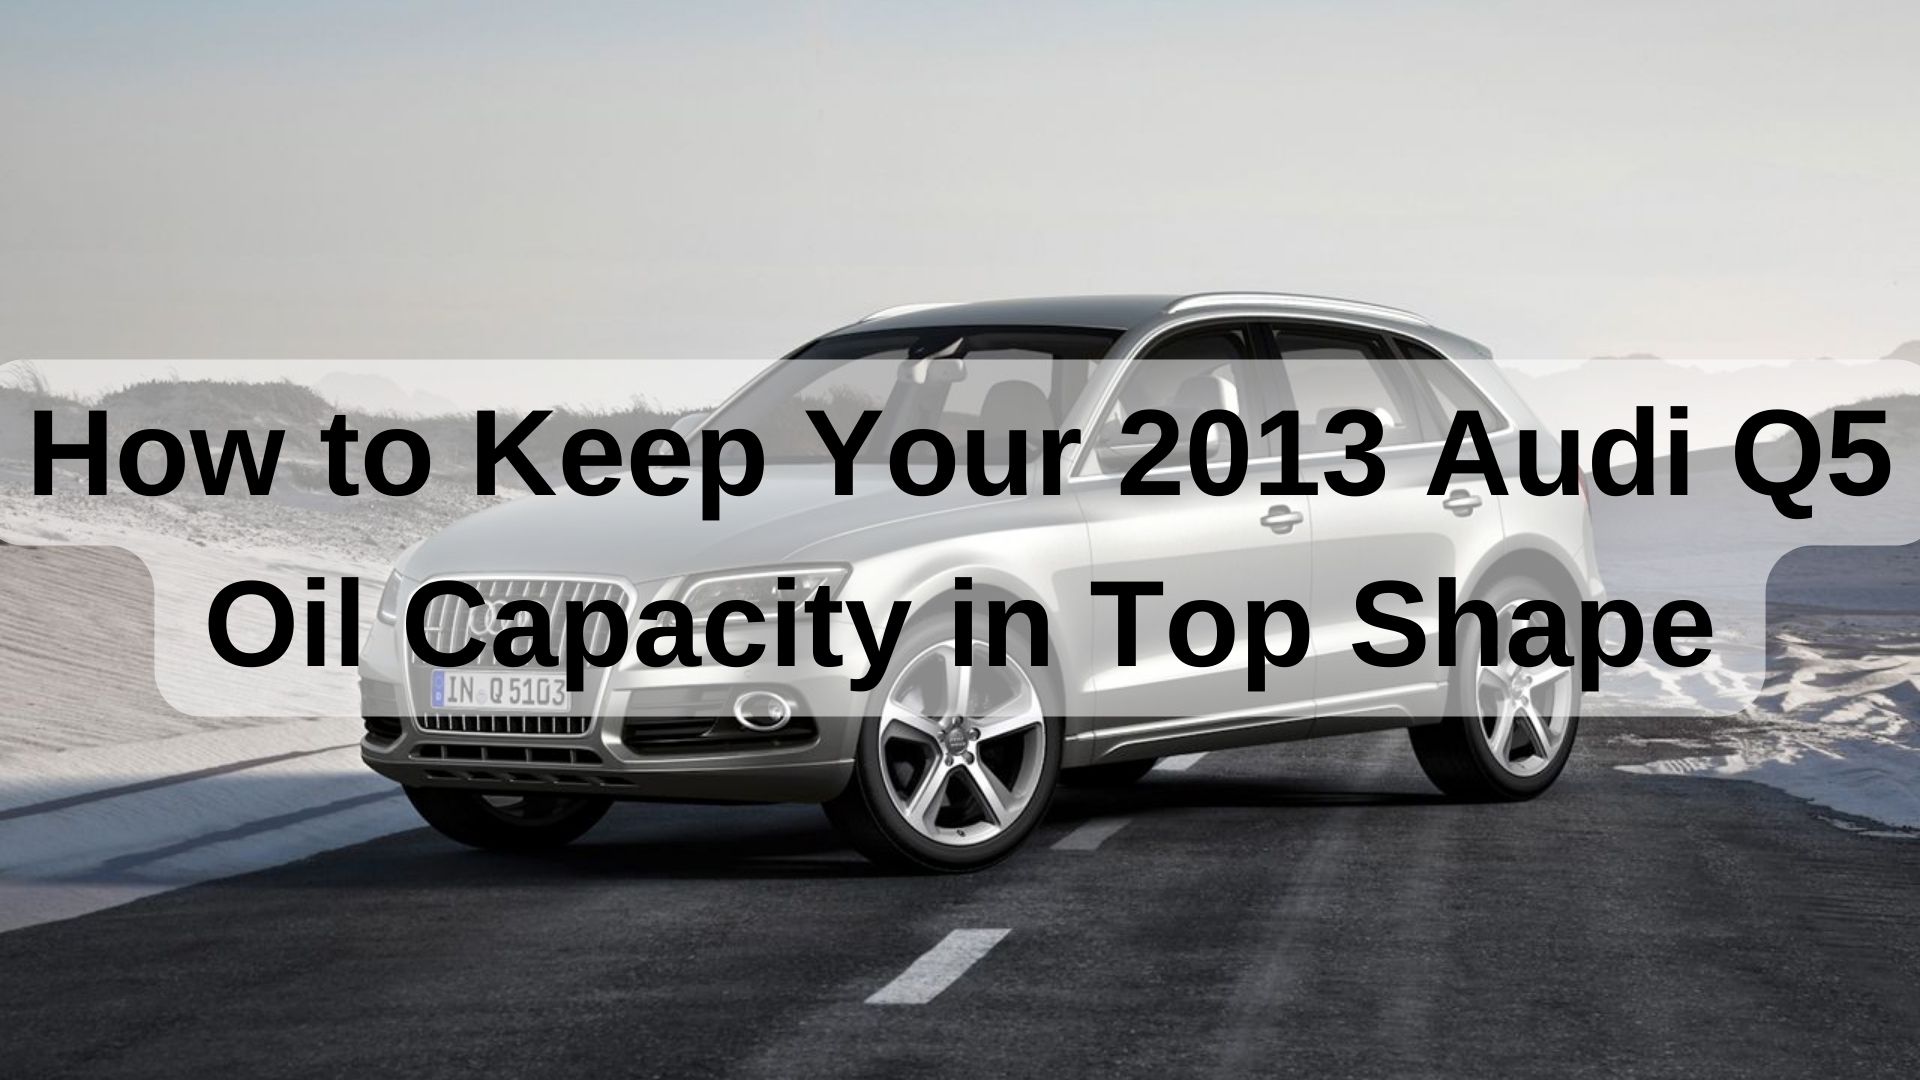 How to Keep Your 2013 Audi Q5 Oil Capacity in Top Shape